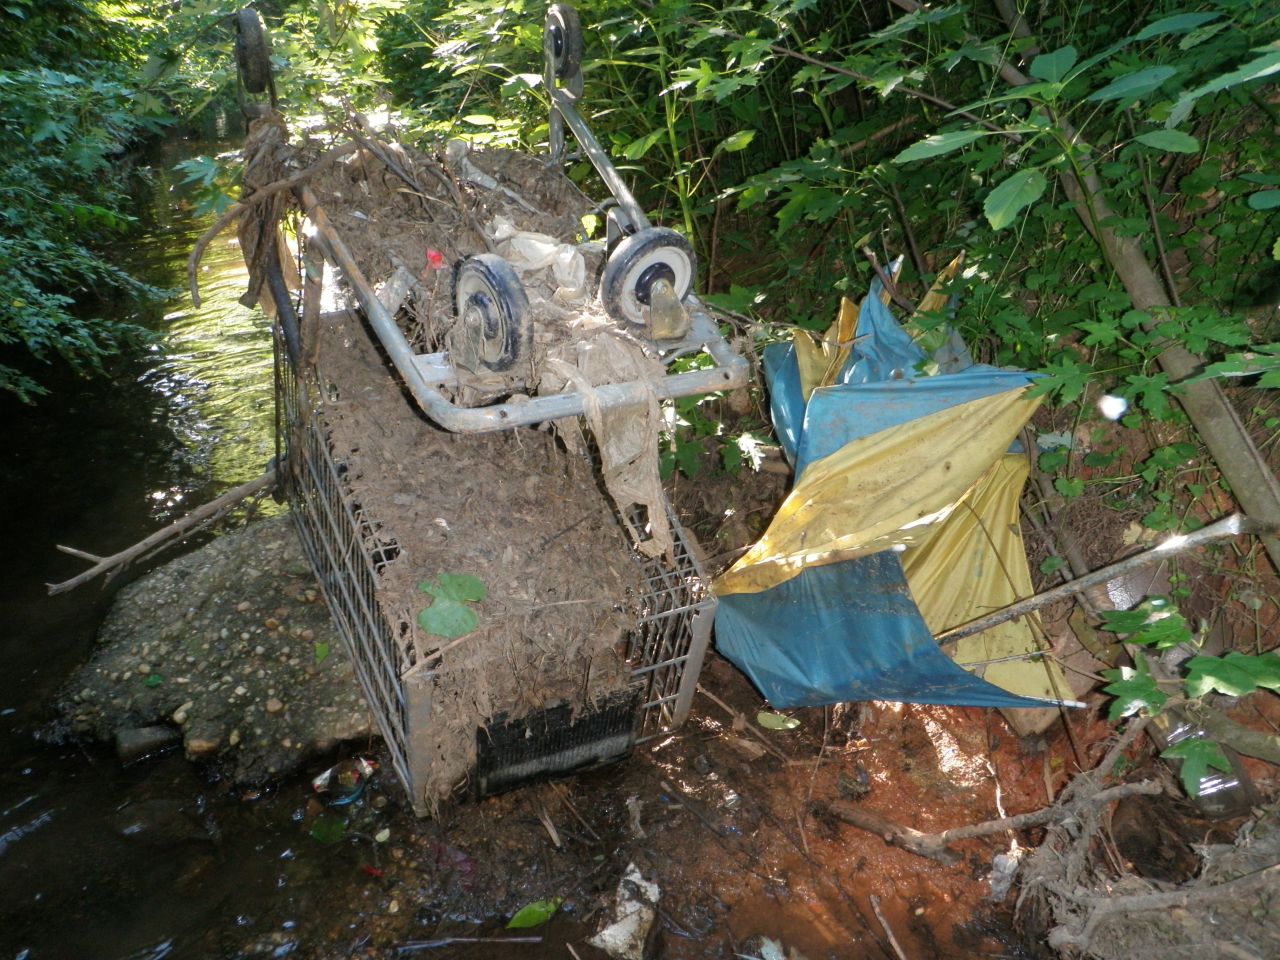 Since 2009, volunteers with the Clean Bread and Cheese Creek organization in Maryland <a href="http://ireport.cnn.com/docs/DOC-1084550">have removed more than 200 shopping carts from the creek</a>, which feeds into the Chesapeake Bay. 